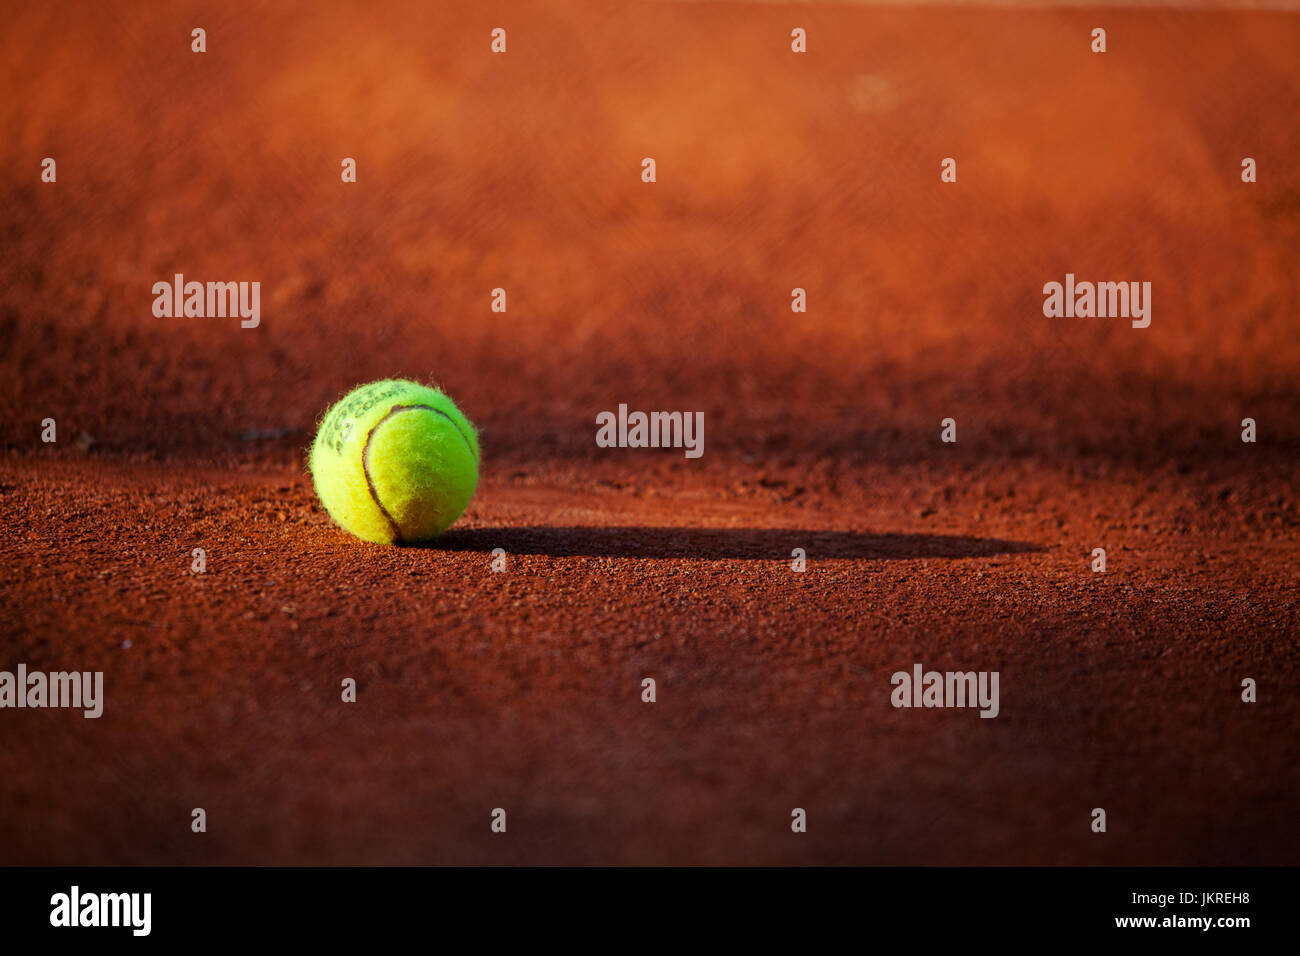 tennis ball on clay court Stock Photo